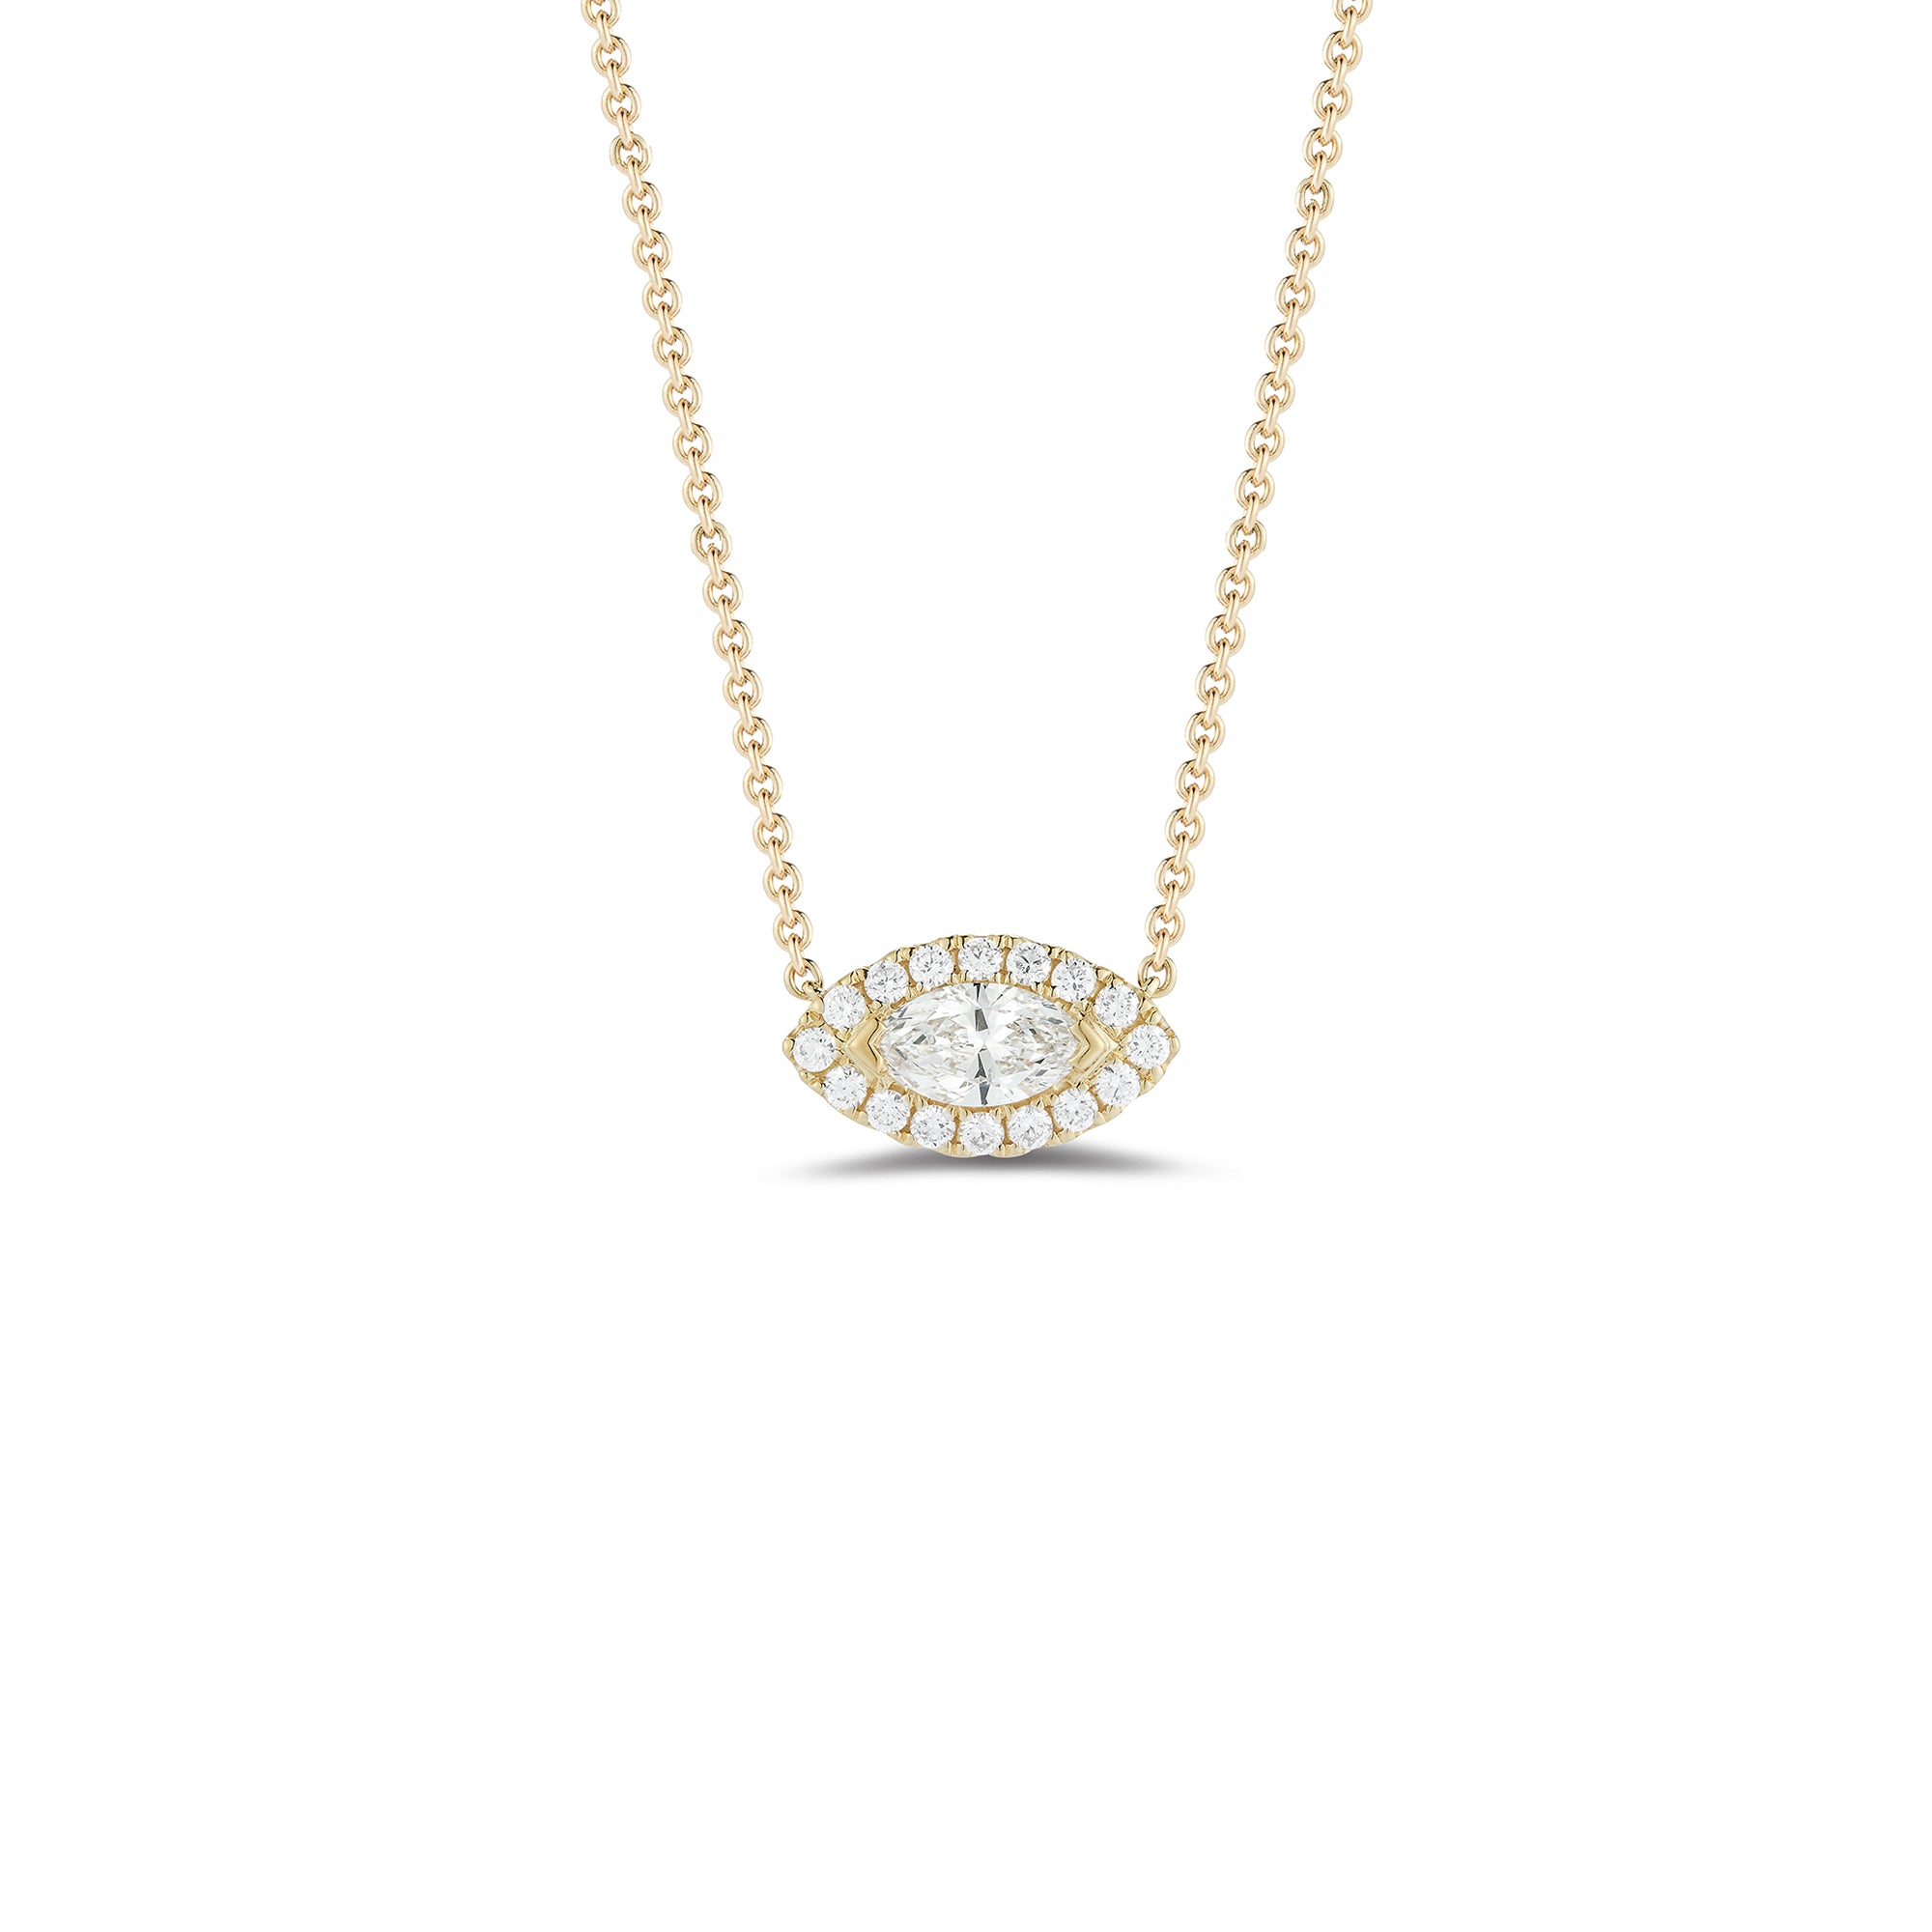 Diamond Halo Necklace for Marquise Solitaire  14k gold, 3.37 grams, 16 round shared prong-set diamonds .19 carats, 1 marquise prong set diamond weighing .60 carats.  Size length 13 millimeters, width 7 millimeters.  Stone size length 8 millimeters, width 4 millimeters.